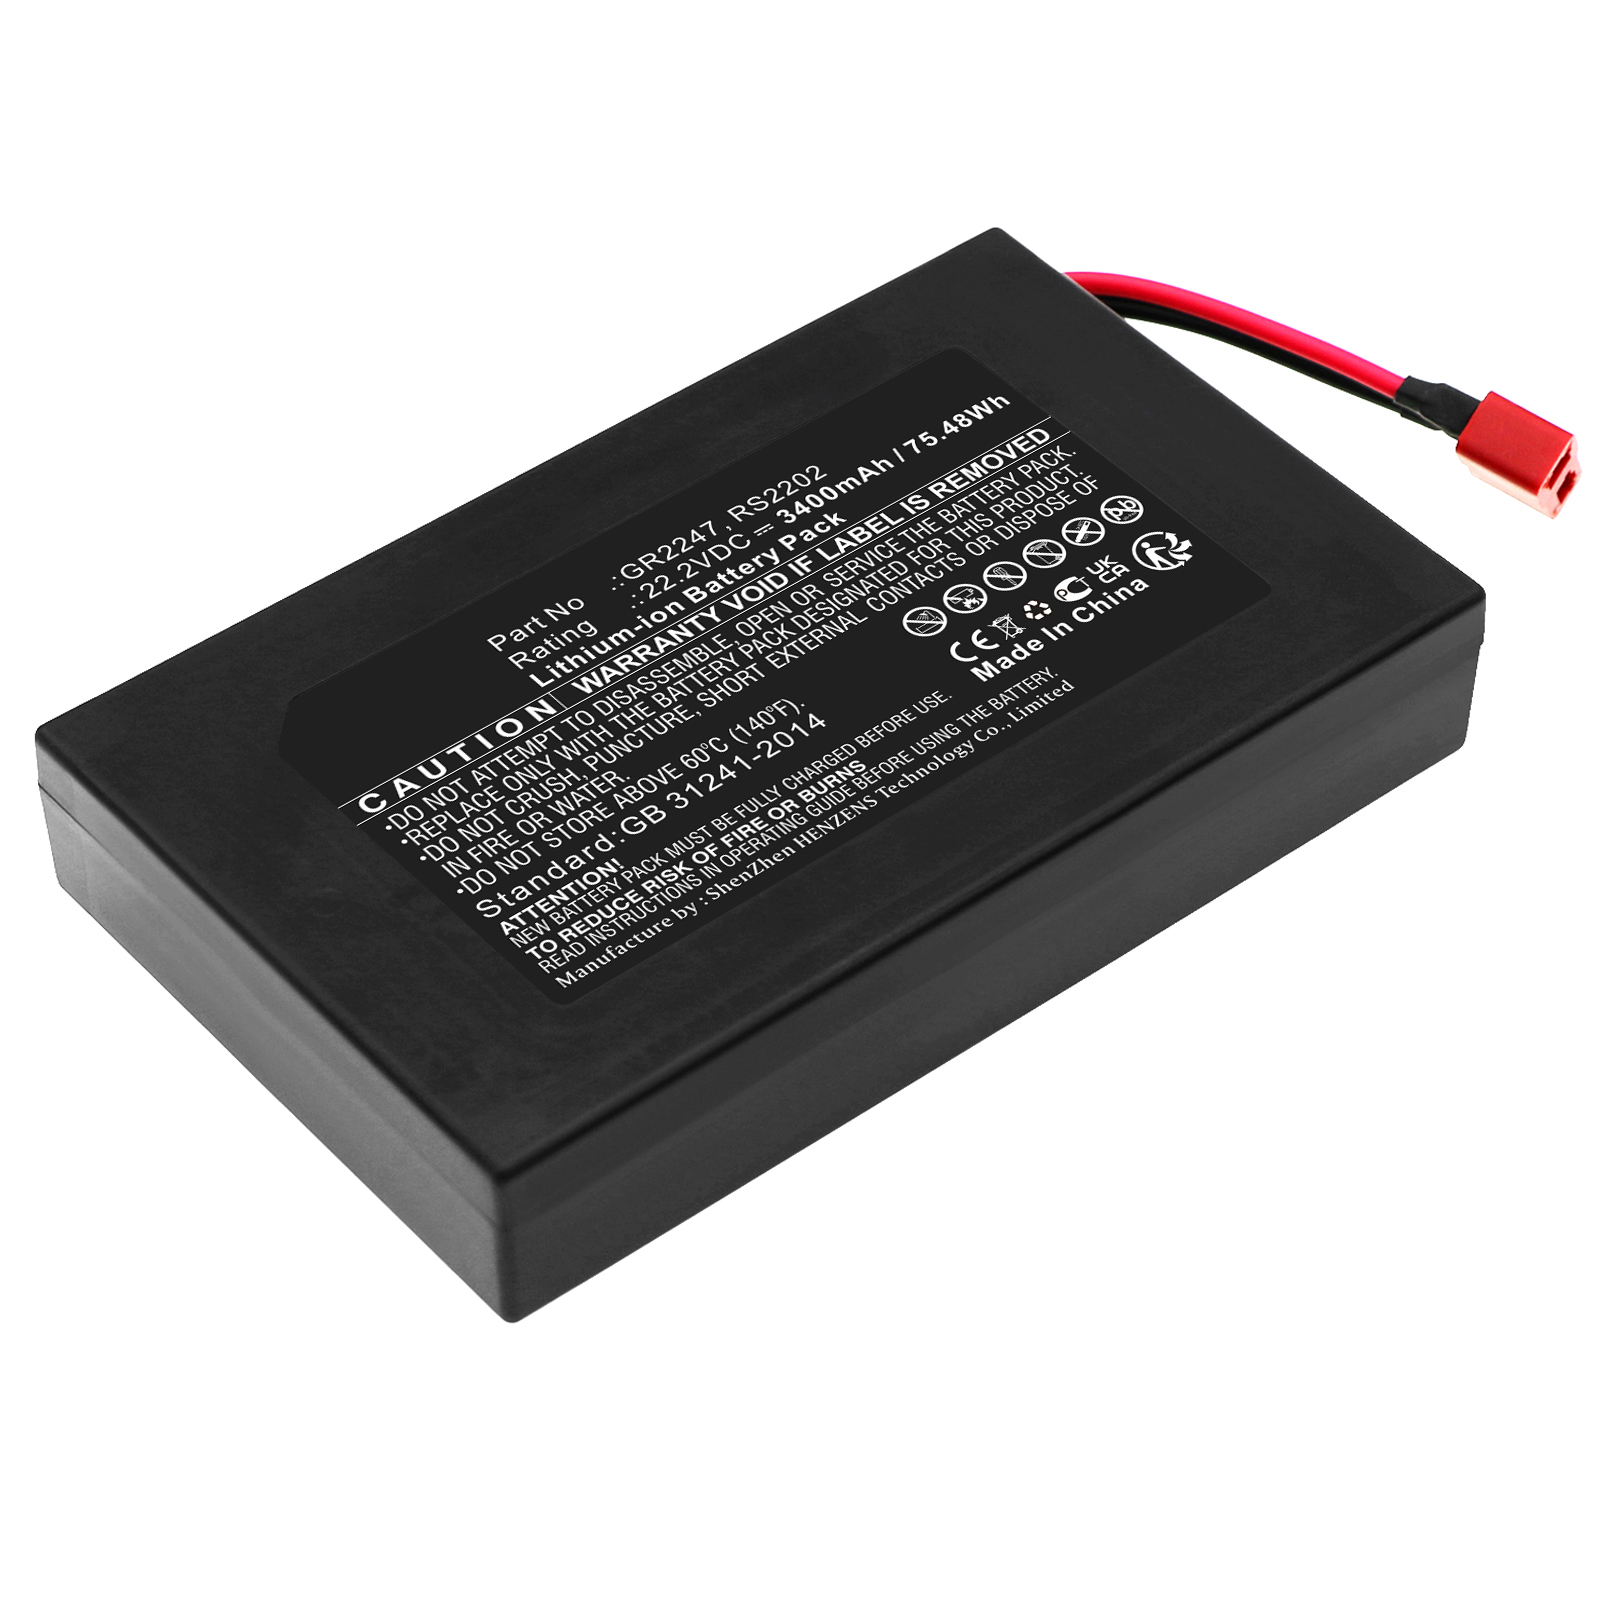 Synergy Digital Scooter Battery, Compatible with Razor GR2247 Scooter Battery (Li-ion, 22.2V, 3400mAh)